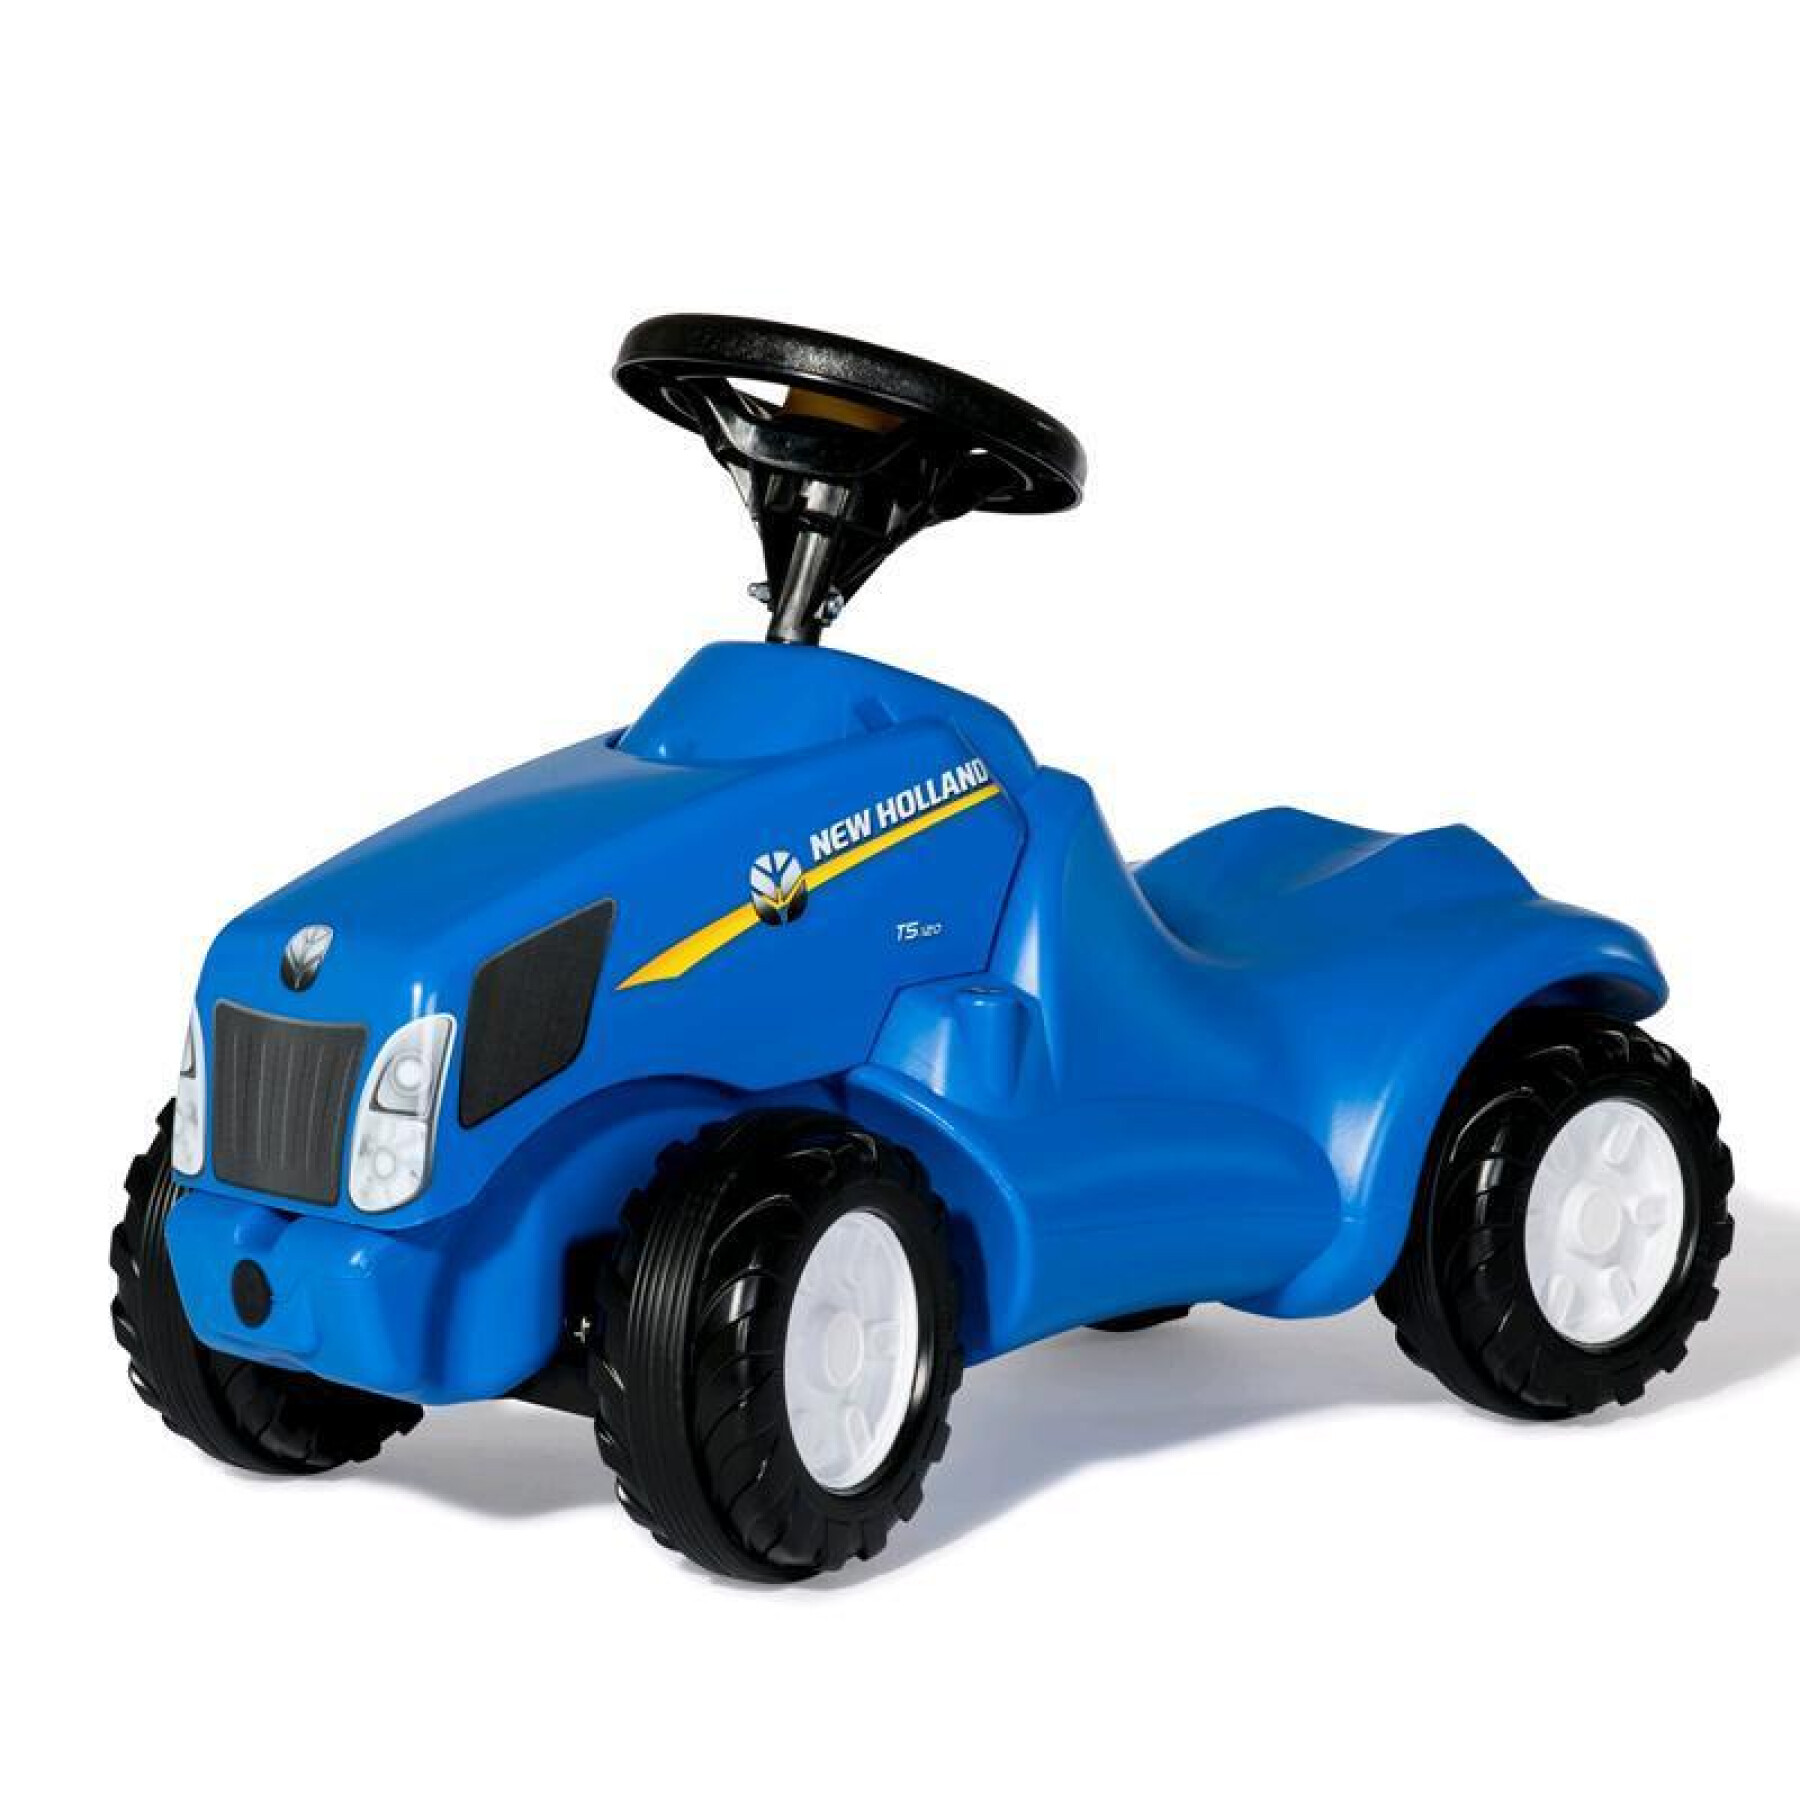 Car games Rolly Toys New Holland